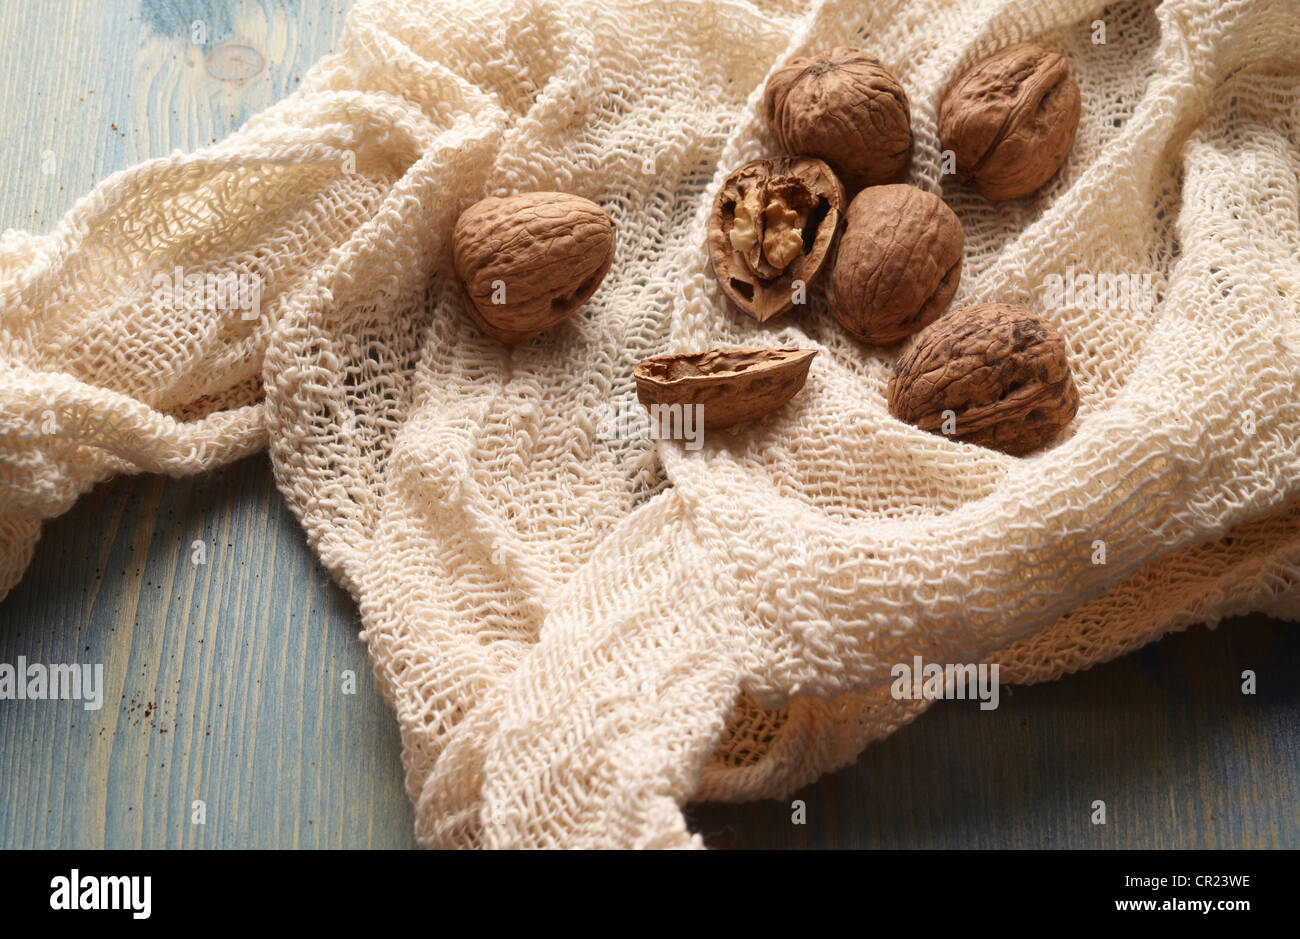 Walnuts in knitted fabric on table Stock Photo